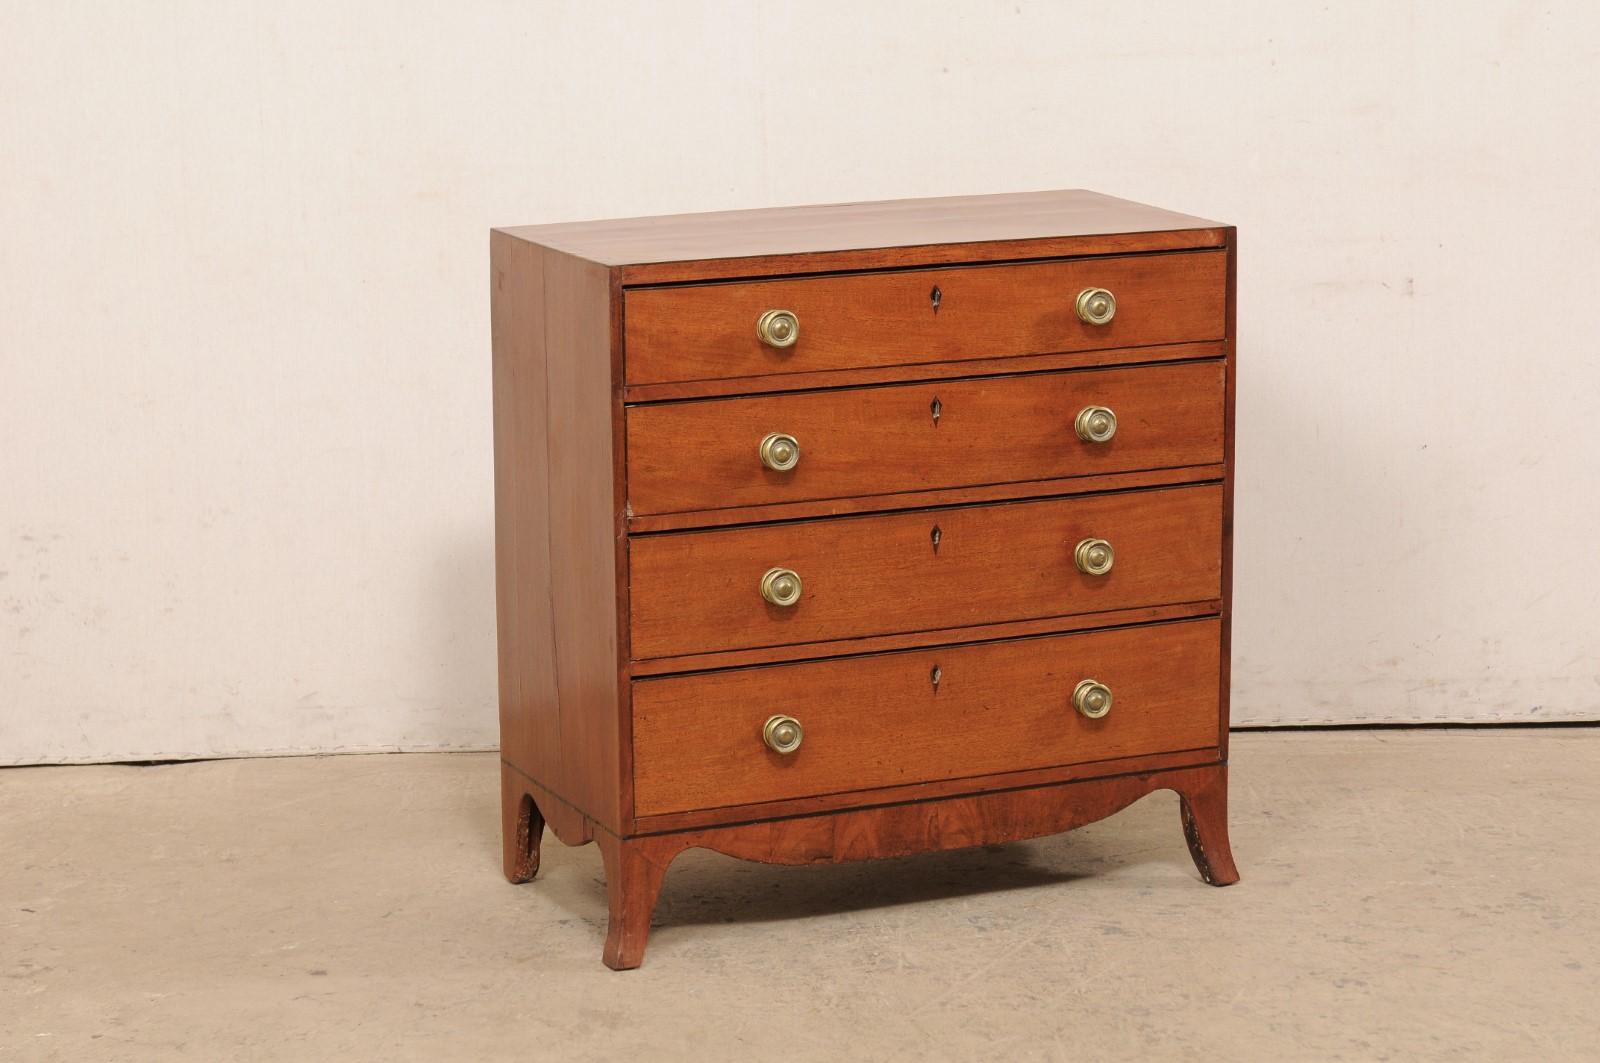 An English chest of four drawers from the early to mid 19th century. This antique chest from England features a rectangular-shaped top with a case which houses four graduated drawers, and has a lovely swag carved skirting along front and both sides.